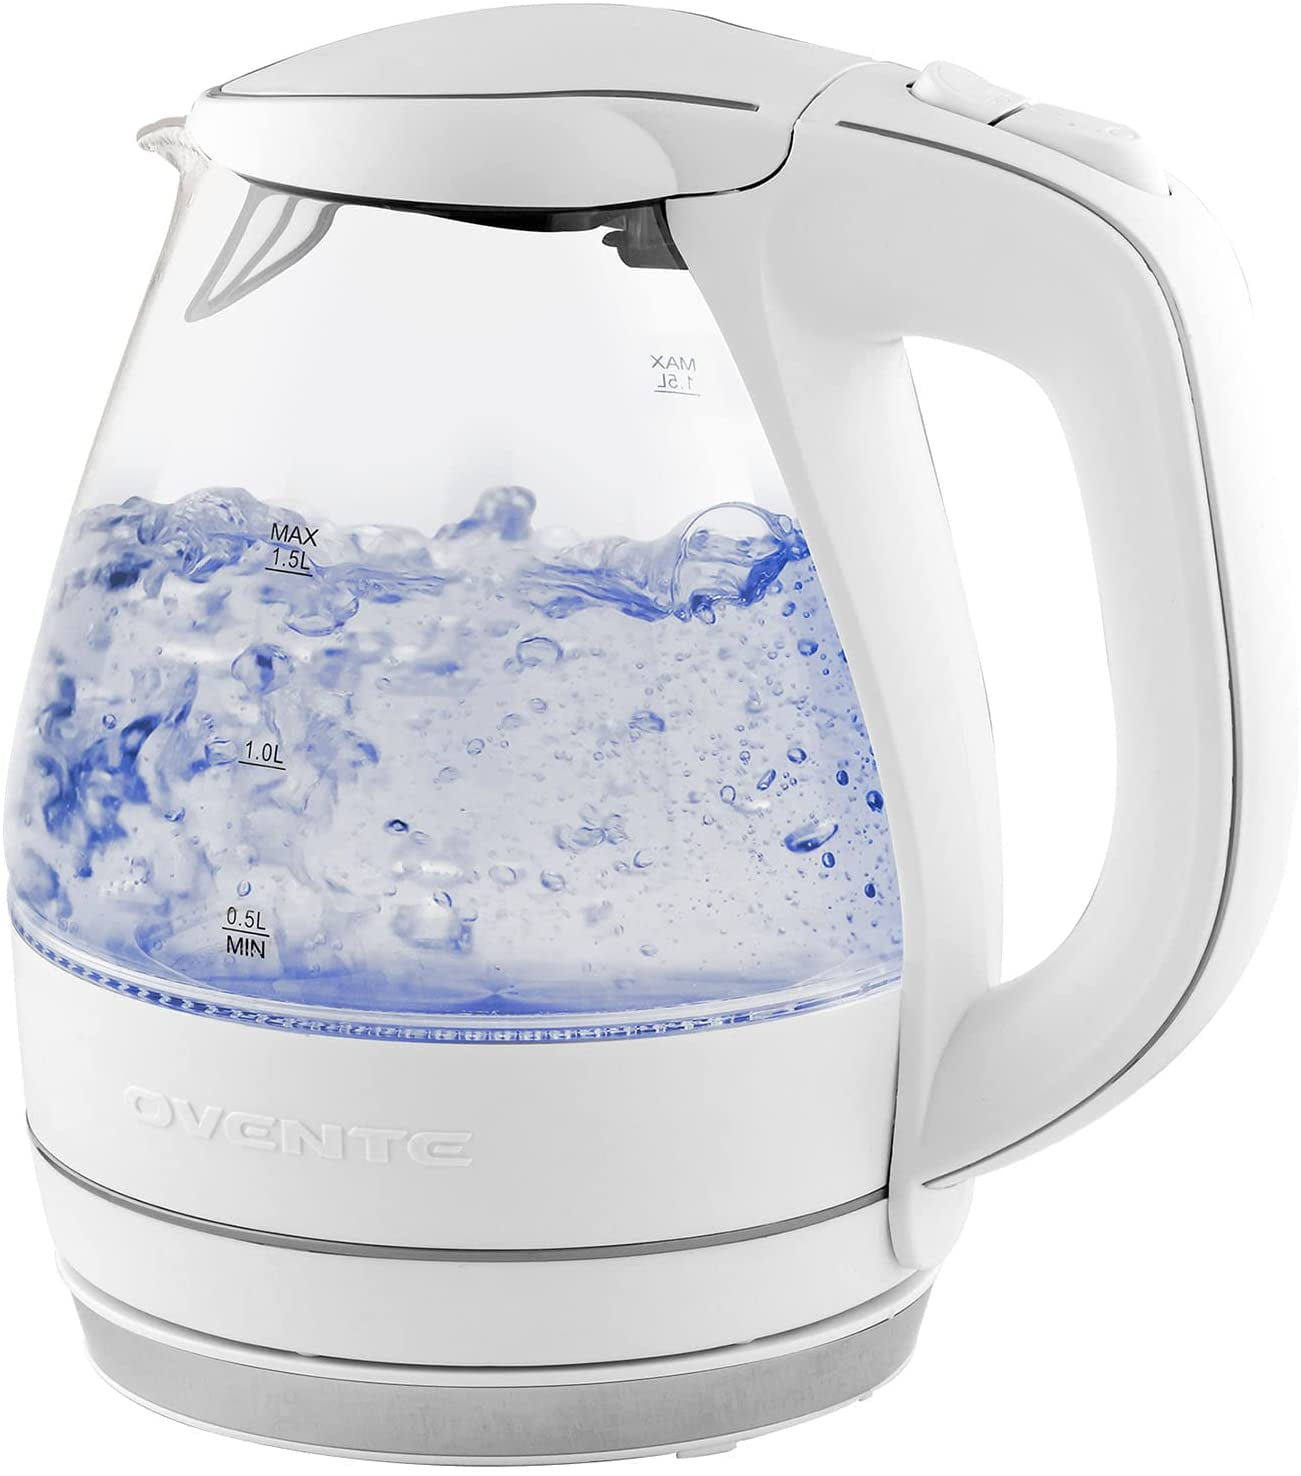 Ovente Kg83 Series 1.5L Glass Cordless Durable Washable Green Electric Kettle 